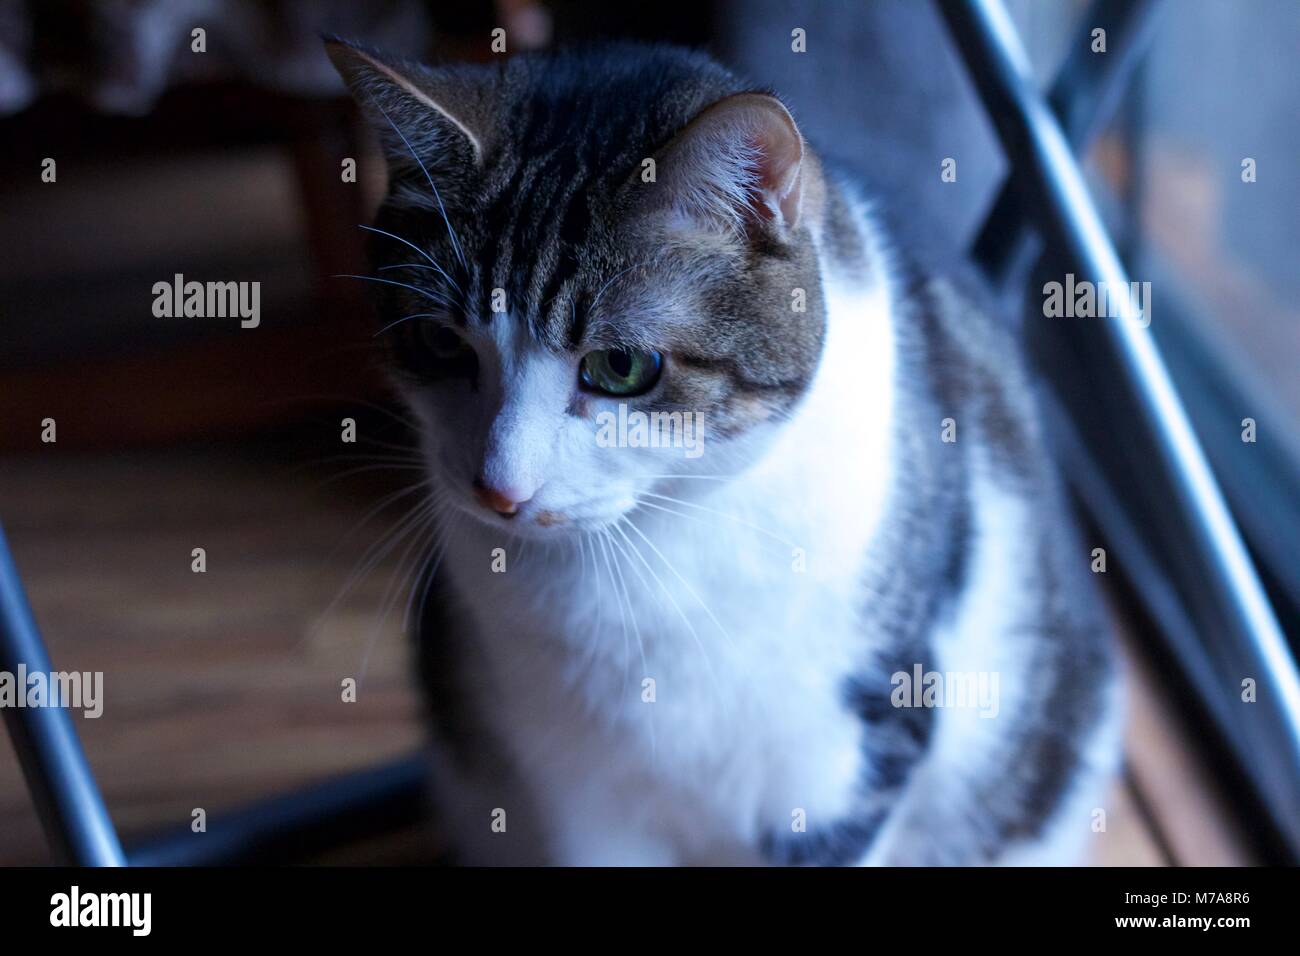 Pet tabby cat sitting on wood floor at home, looking at something. Stock Photo